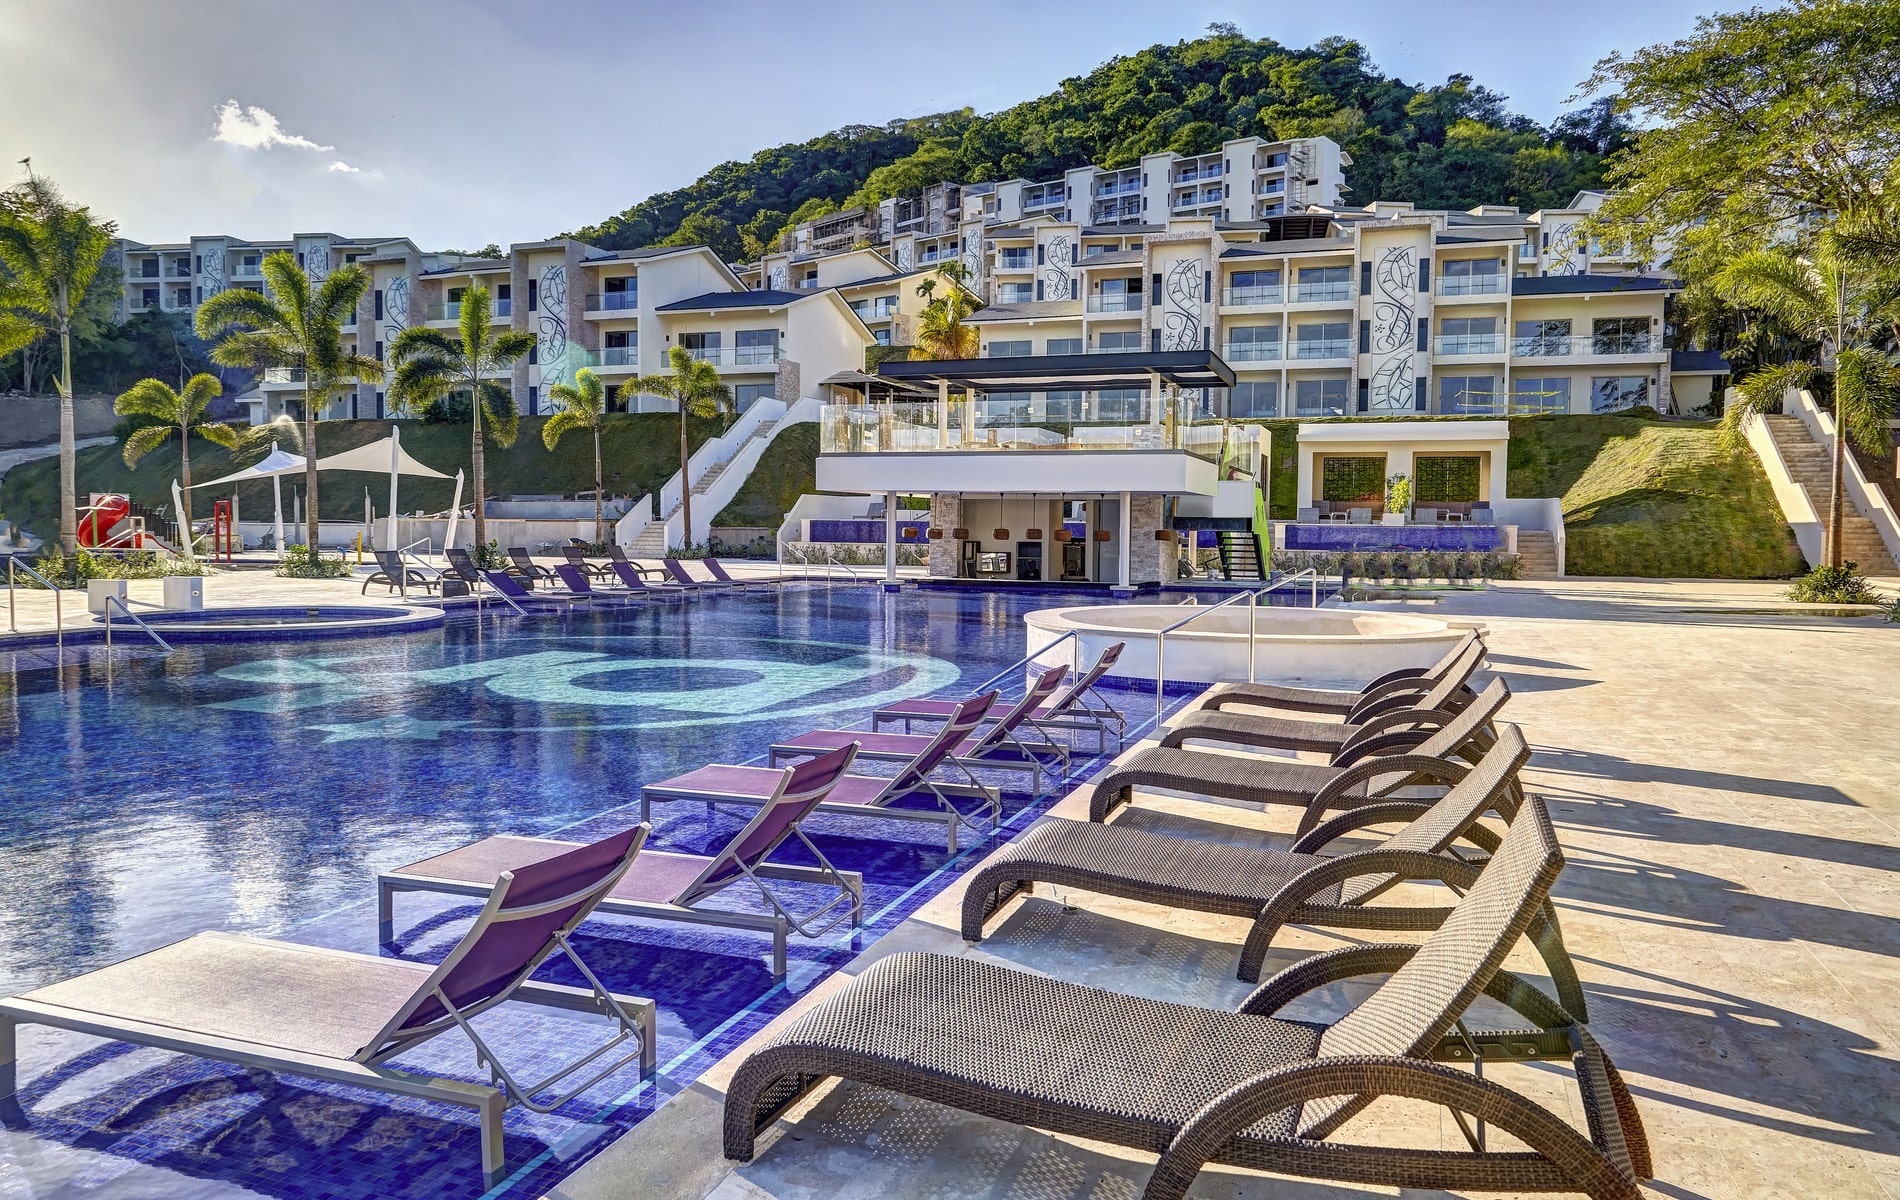 Planet Hollywood has come to Costa Rica with its new star-worthy, all-inclusive beach resort located on Culebra Bay.